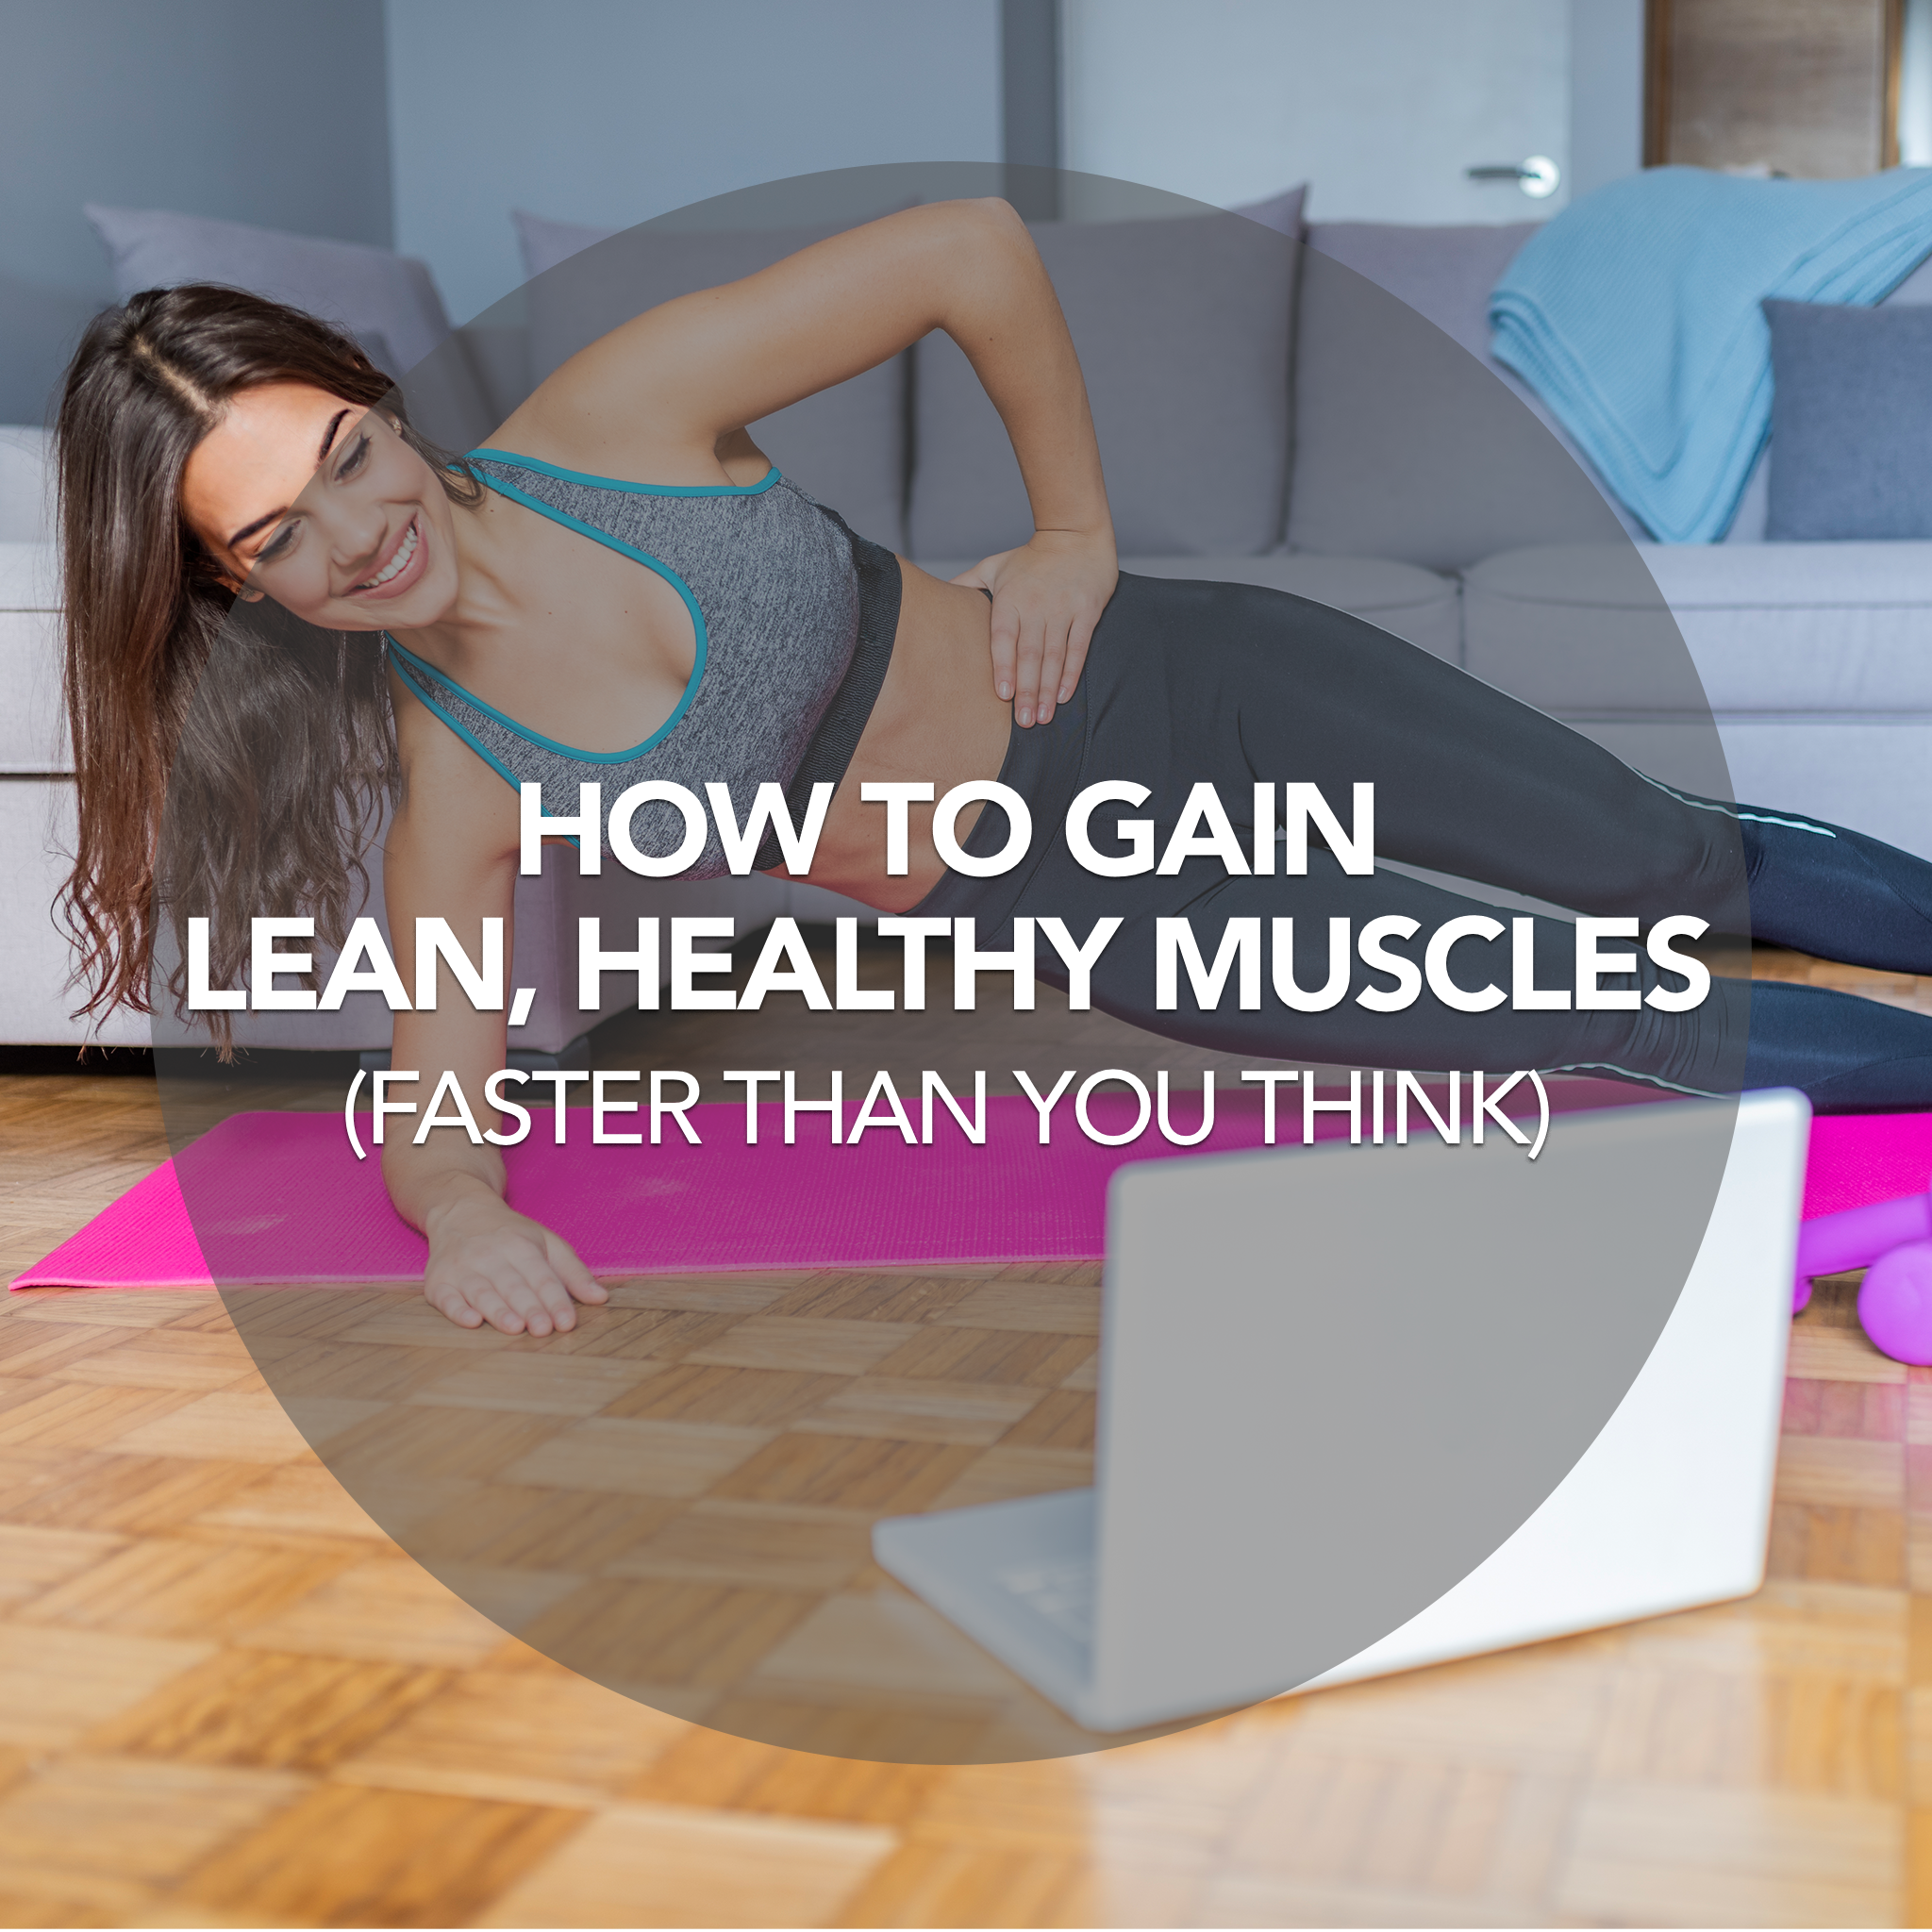 How to Gain Lean, Healthy Muscles (Faster Than You Think)